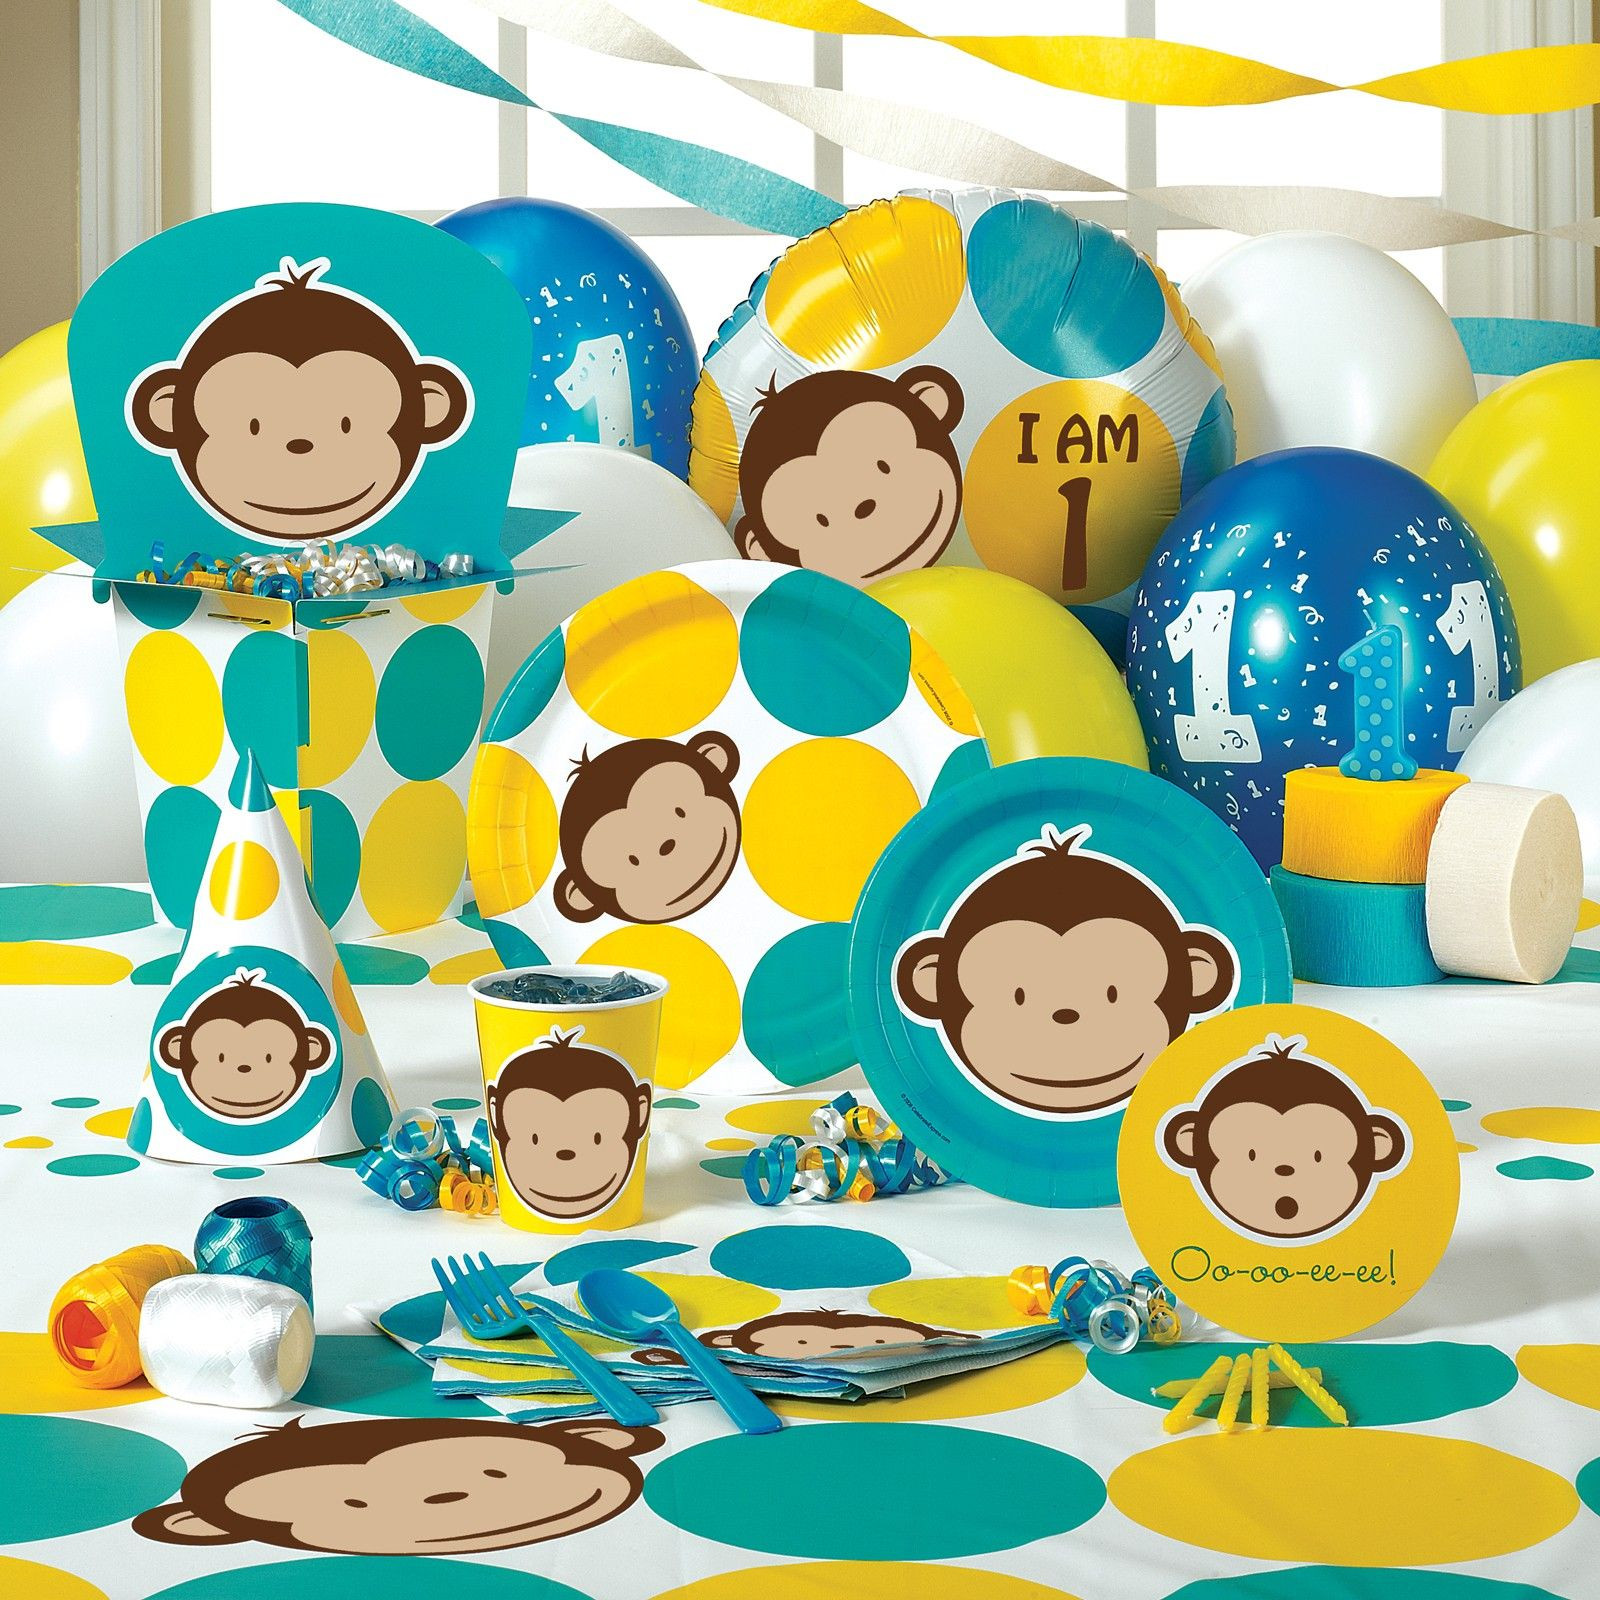 Monkey Birthday Decorations
 This is the other theme we like It s going to be a